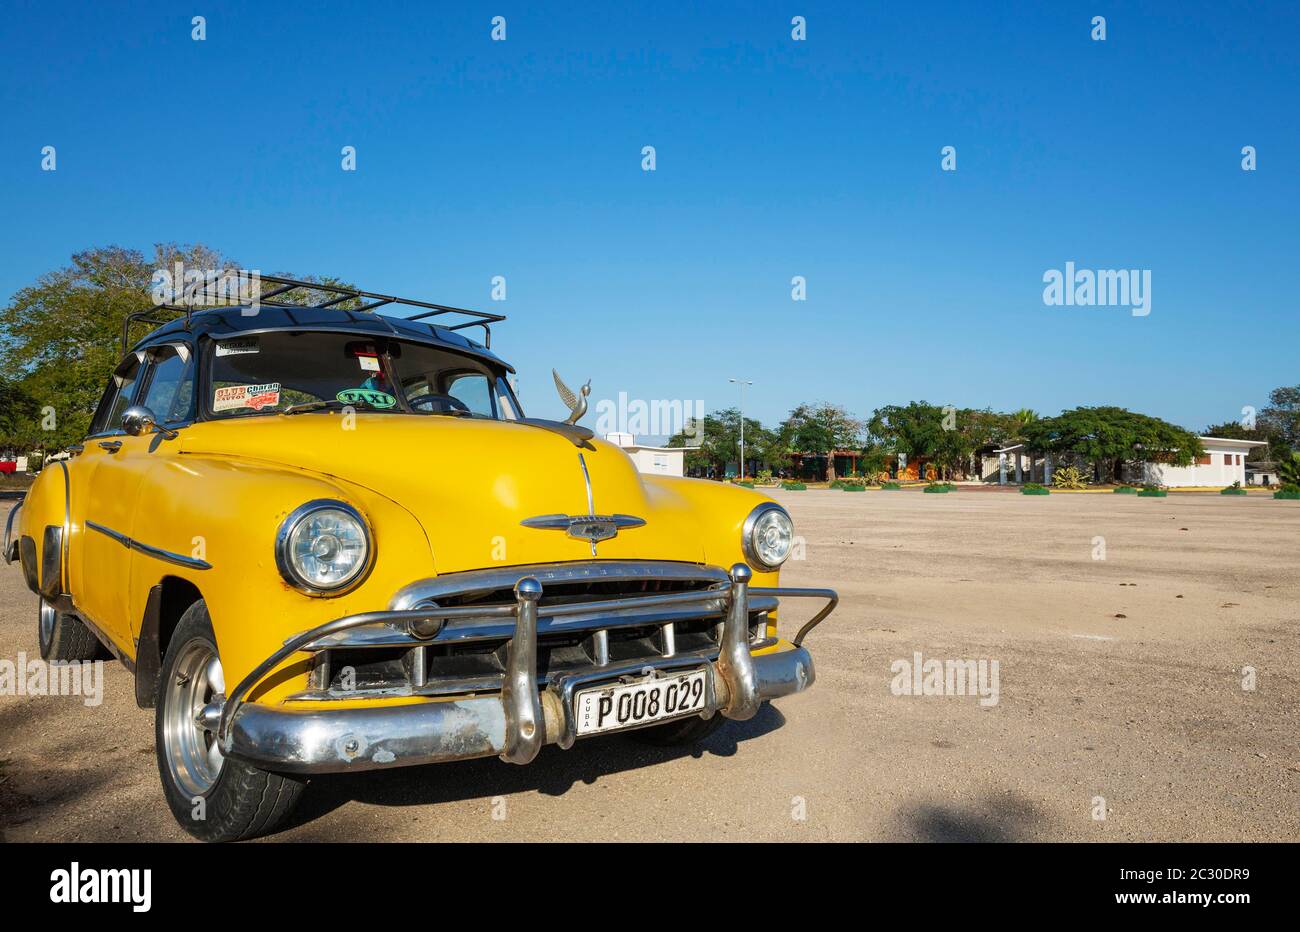 Chevrolet classic car from the 1950s used as a taxi, Playa Giron, Cuba Stock Photo